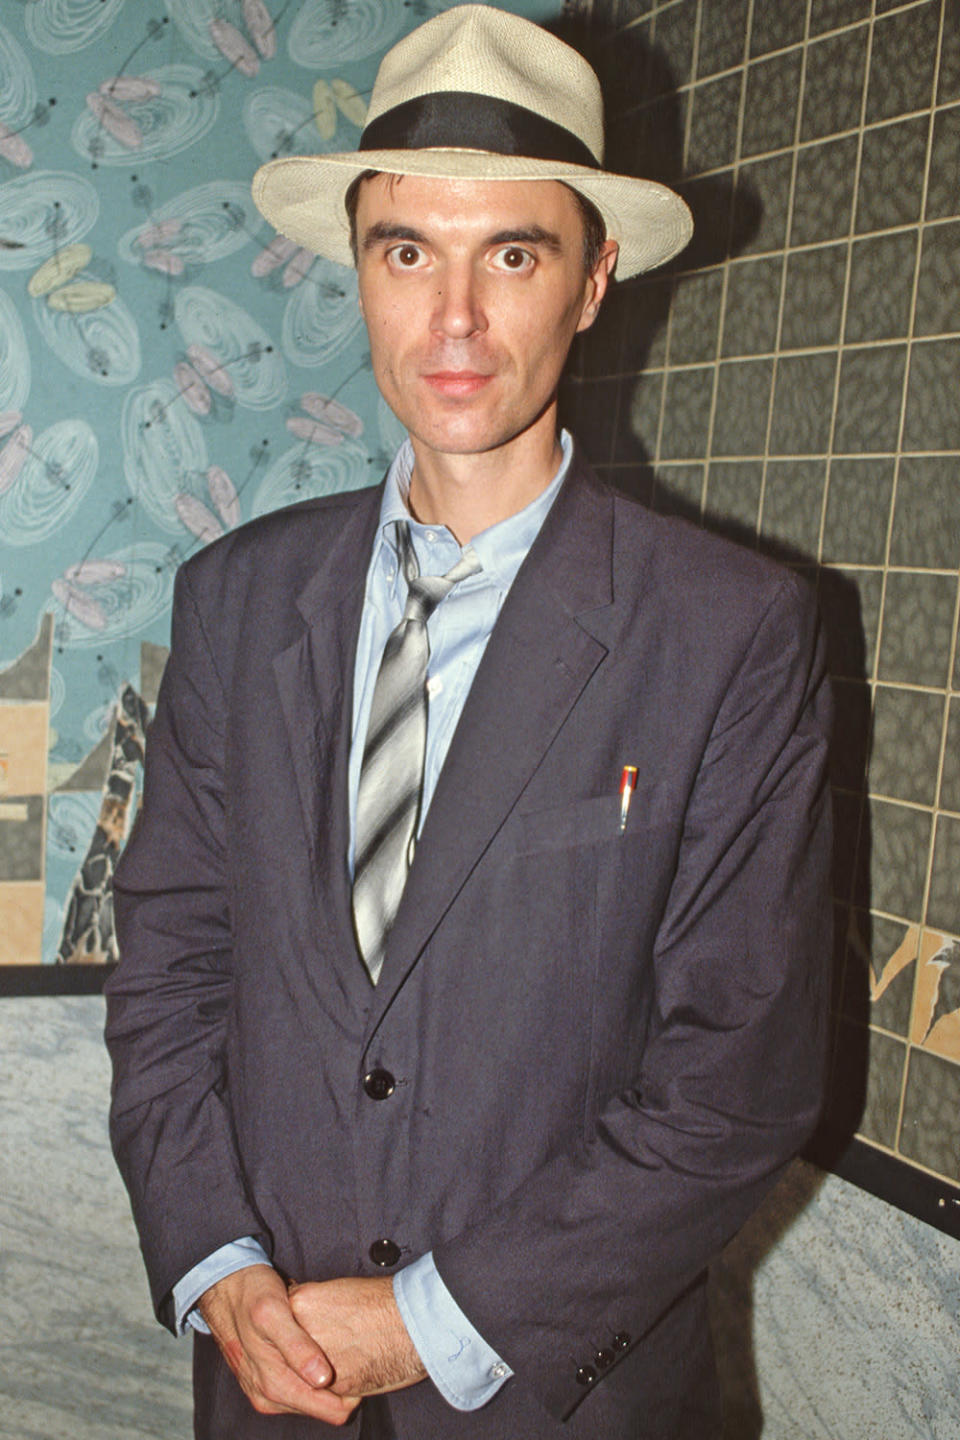 <p>Talking Heads musician David Byrne (pictured in 1984) took home the Vanguard Award in 1985. He shared the honor with rock duo Godley & Creme as well as Russell Mulcahy, who notably directed "Video Killed the Radio Star." </p>